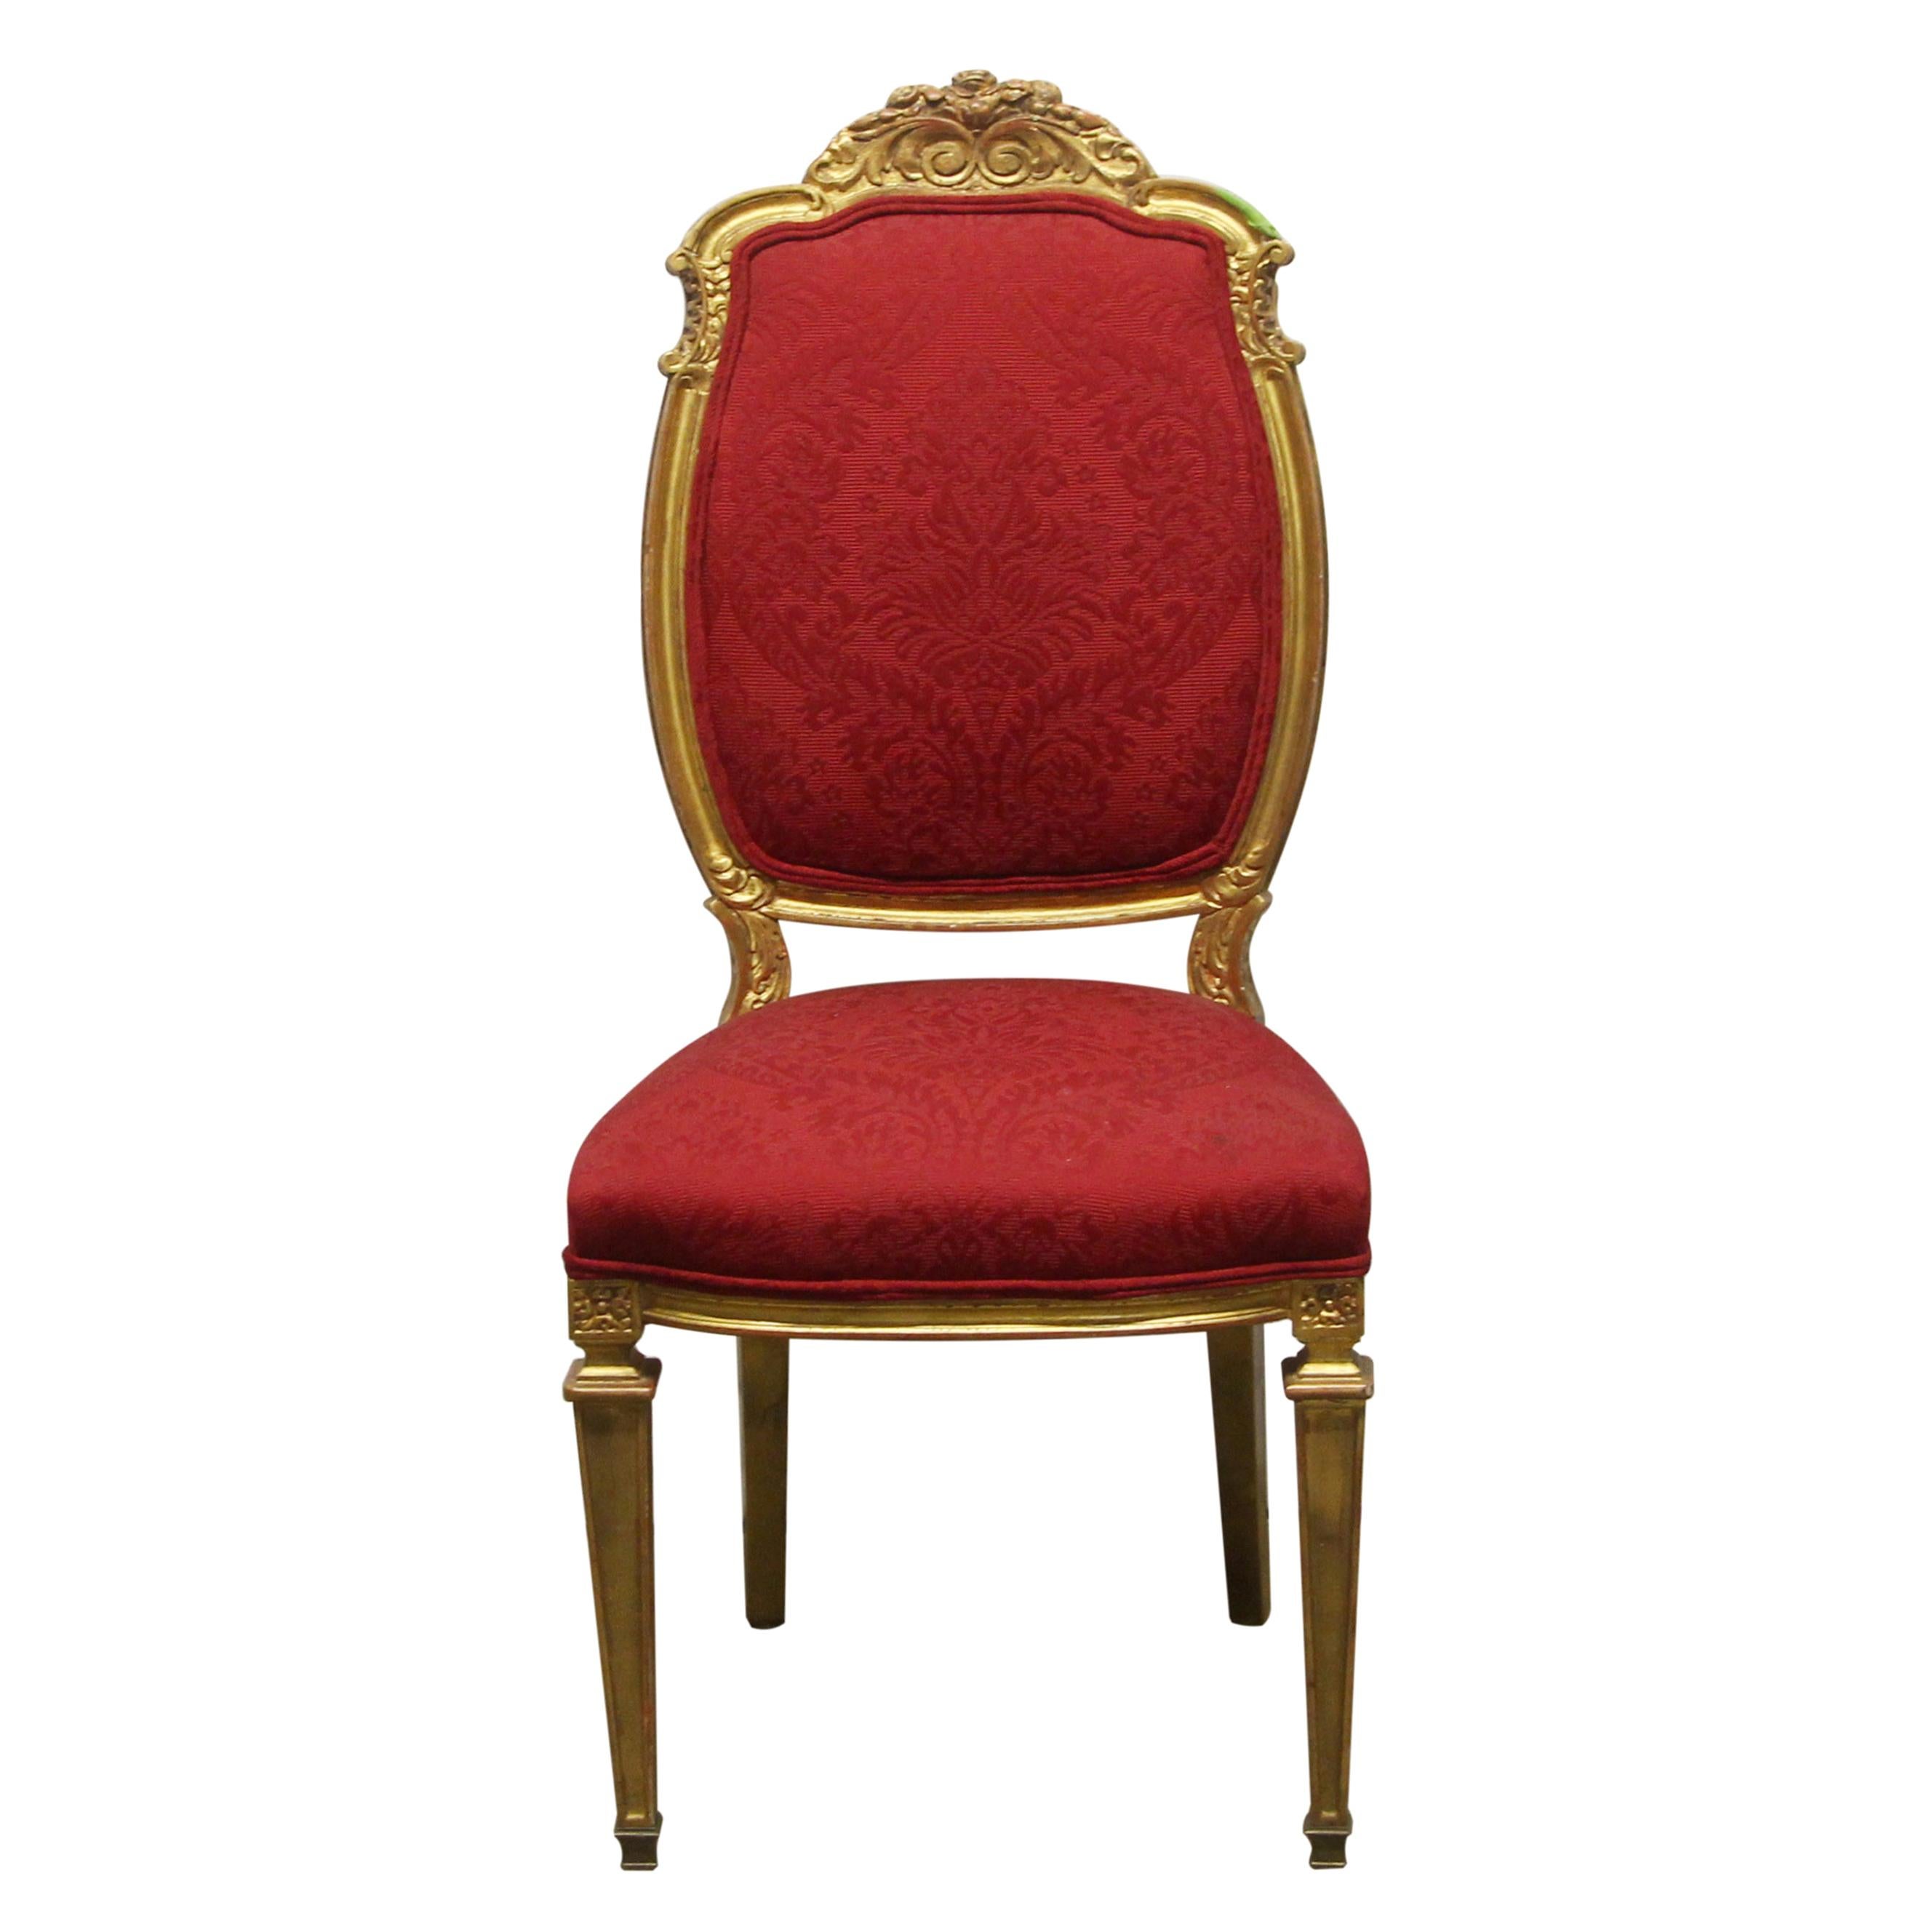 1920s French Chair Gilded Carved Wood Frame Red Floral Upholstery